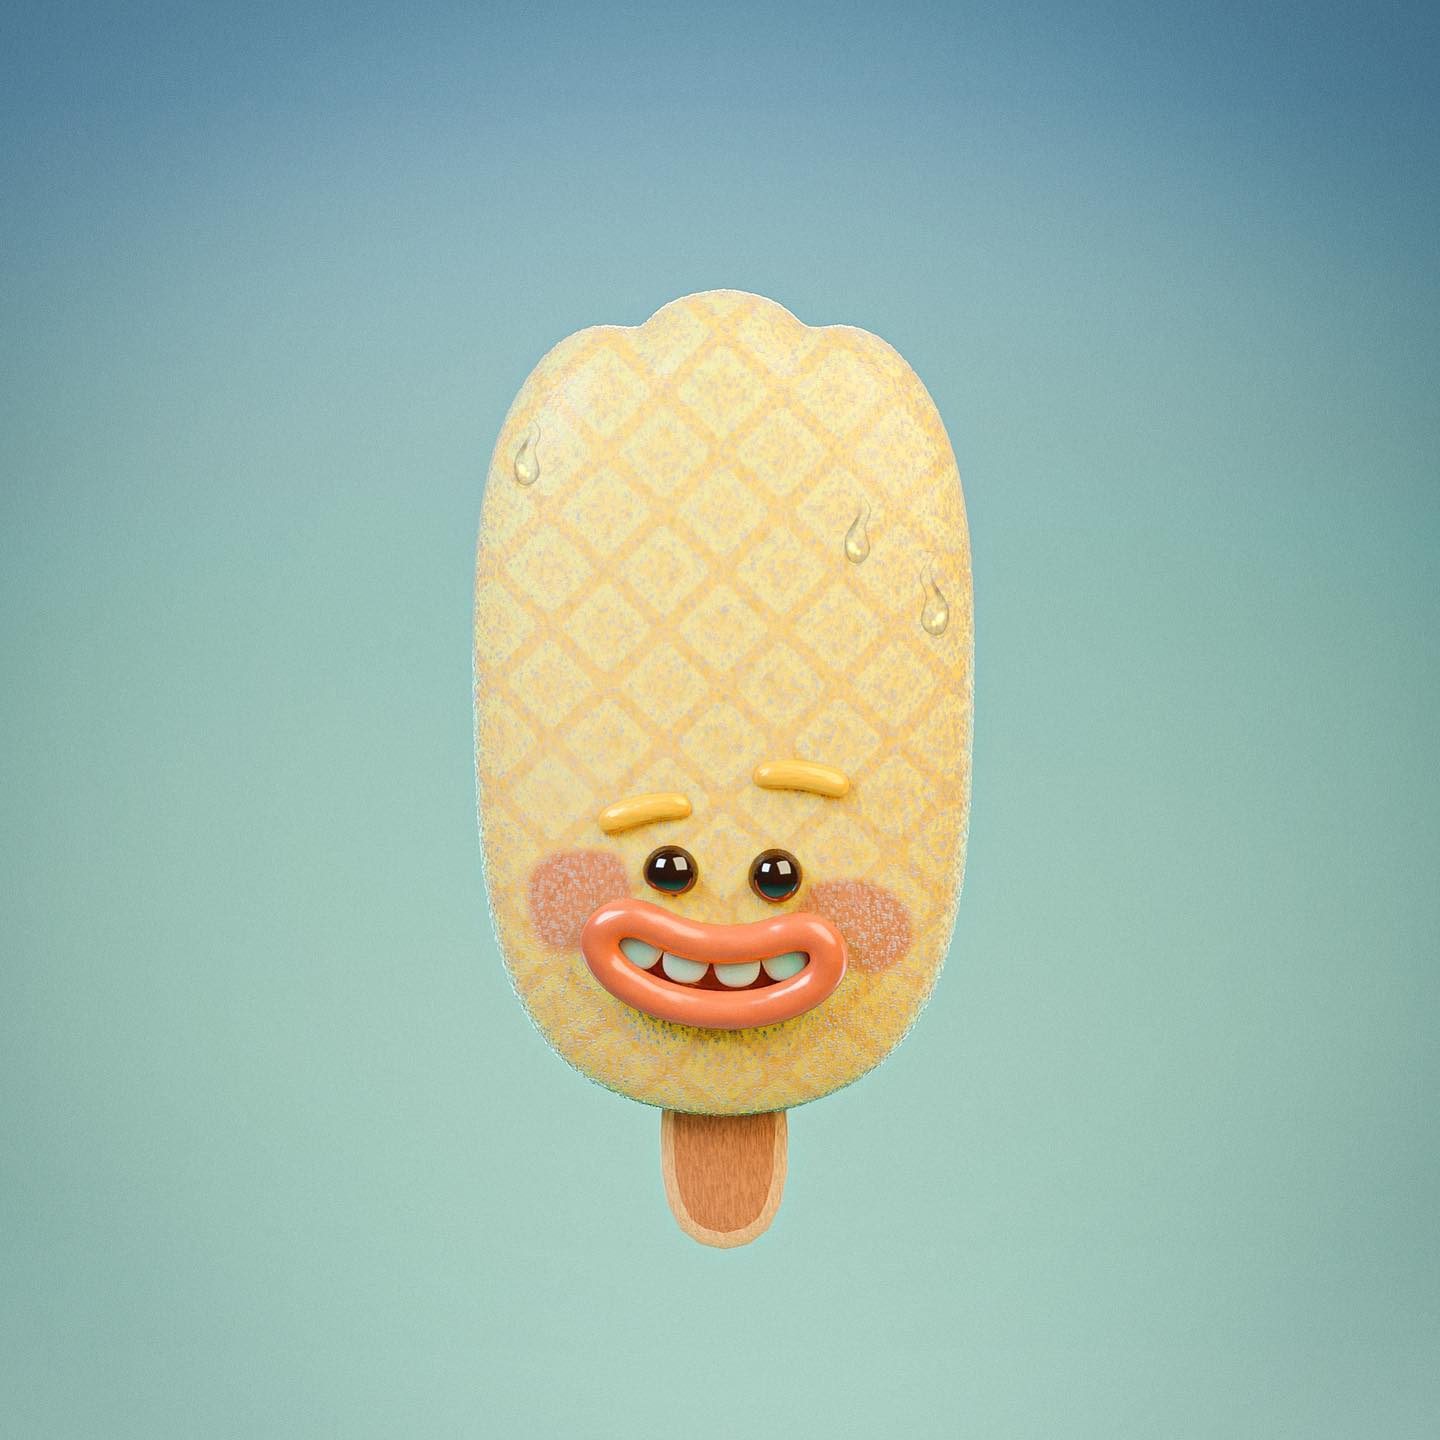 Cute ice cream character with pineapple flavor